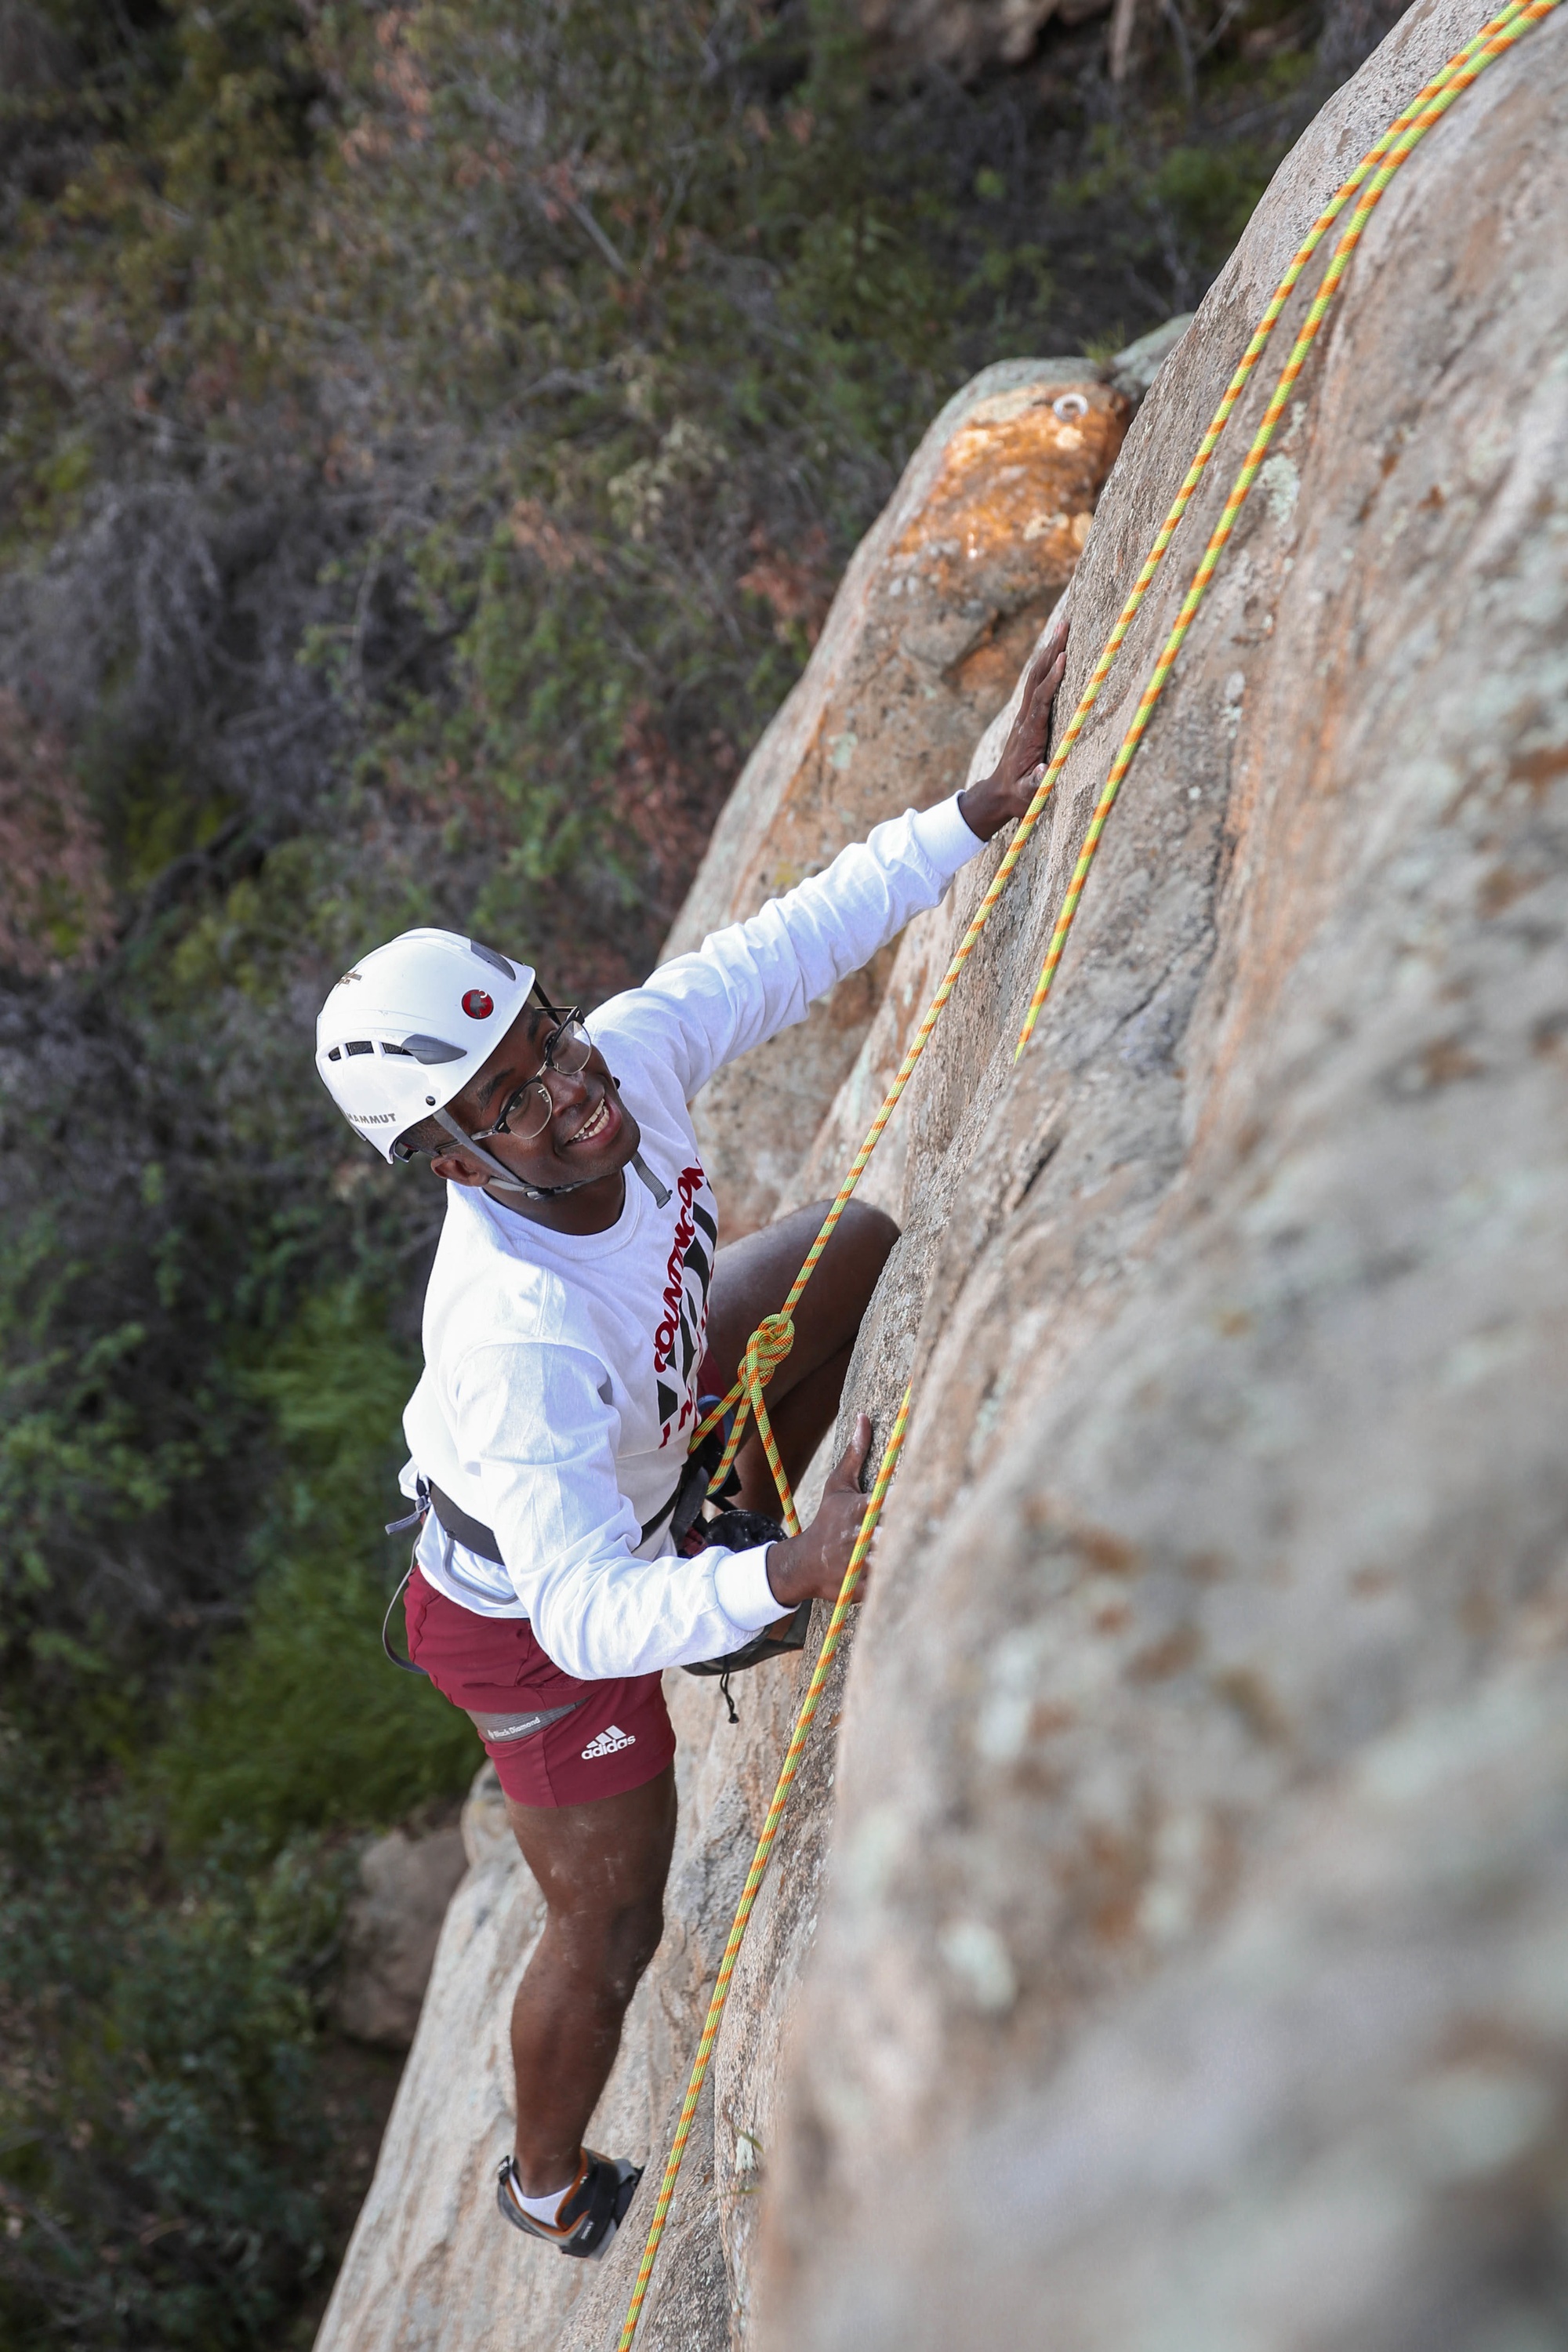 Extinto letal batería DVIDS - Images - Marines with 1st Transportation Battalion Try Rock Climbing  [Image 3 of 9]